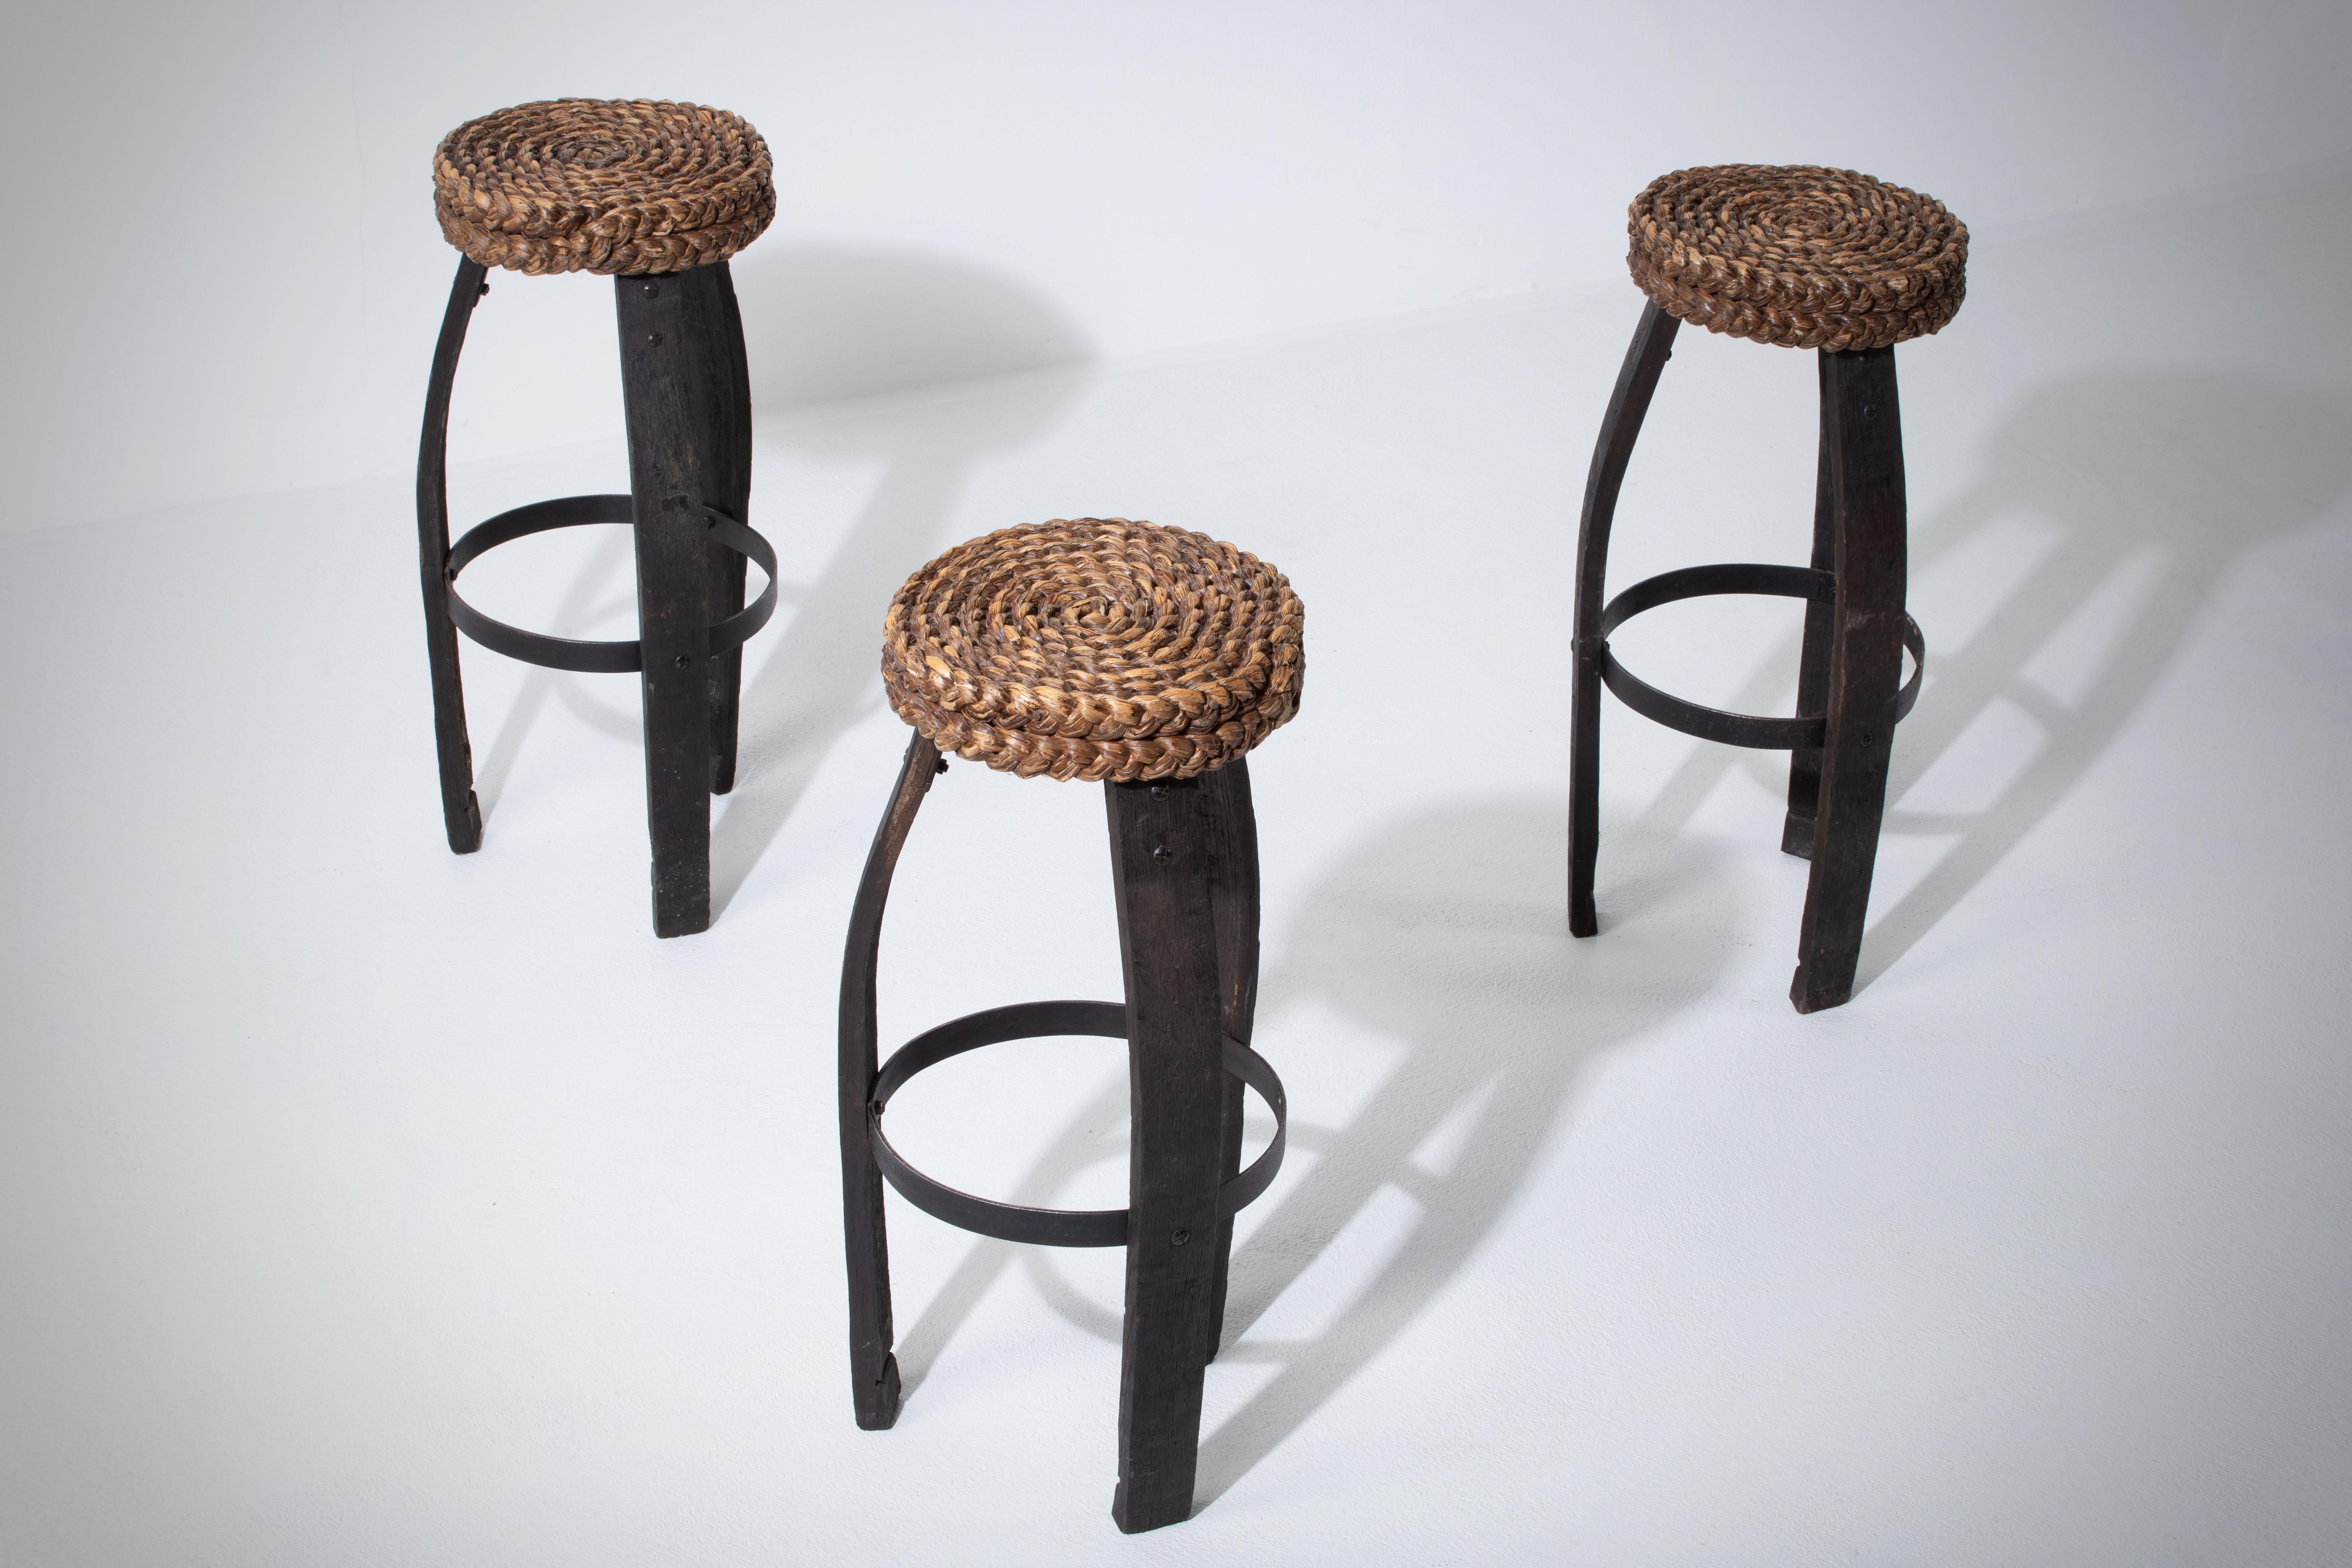 Bar stool in oak with a woven cane seat by French designers Adrien Audoux and Frida Minet. France, 1950s.

The seat consists of thick, circular braided reed braids. Legs are made of dark oak and iron, which forms a perfect contrast to the seat.